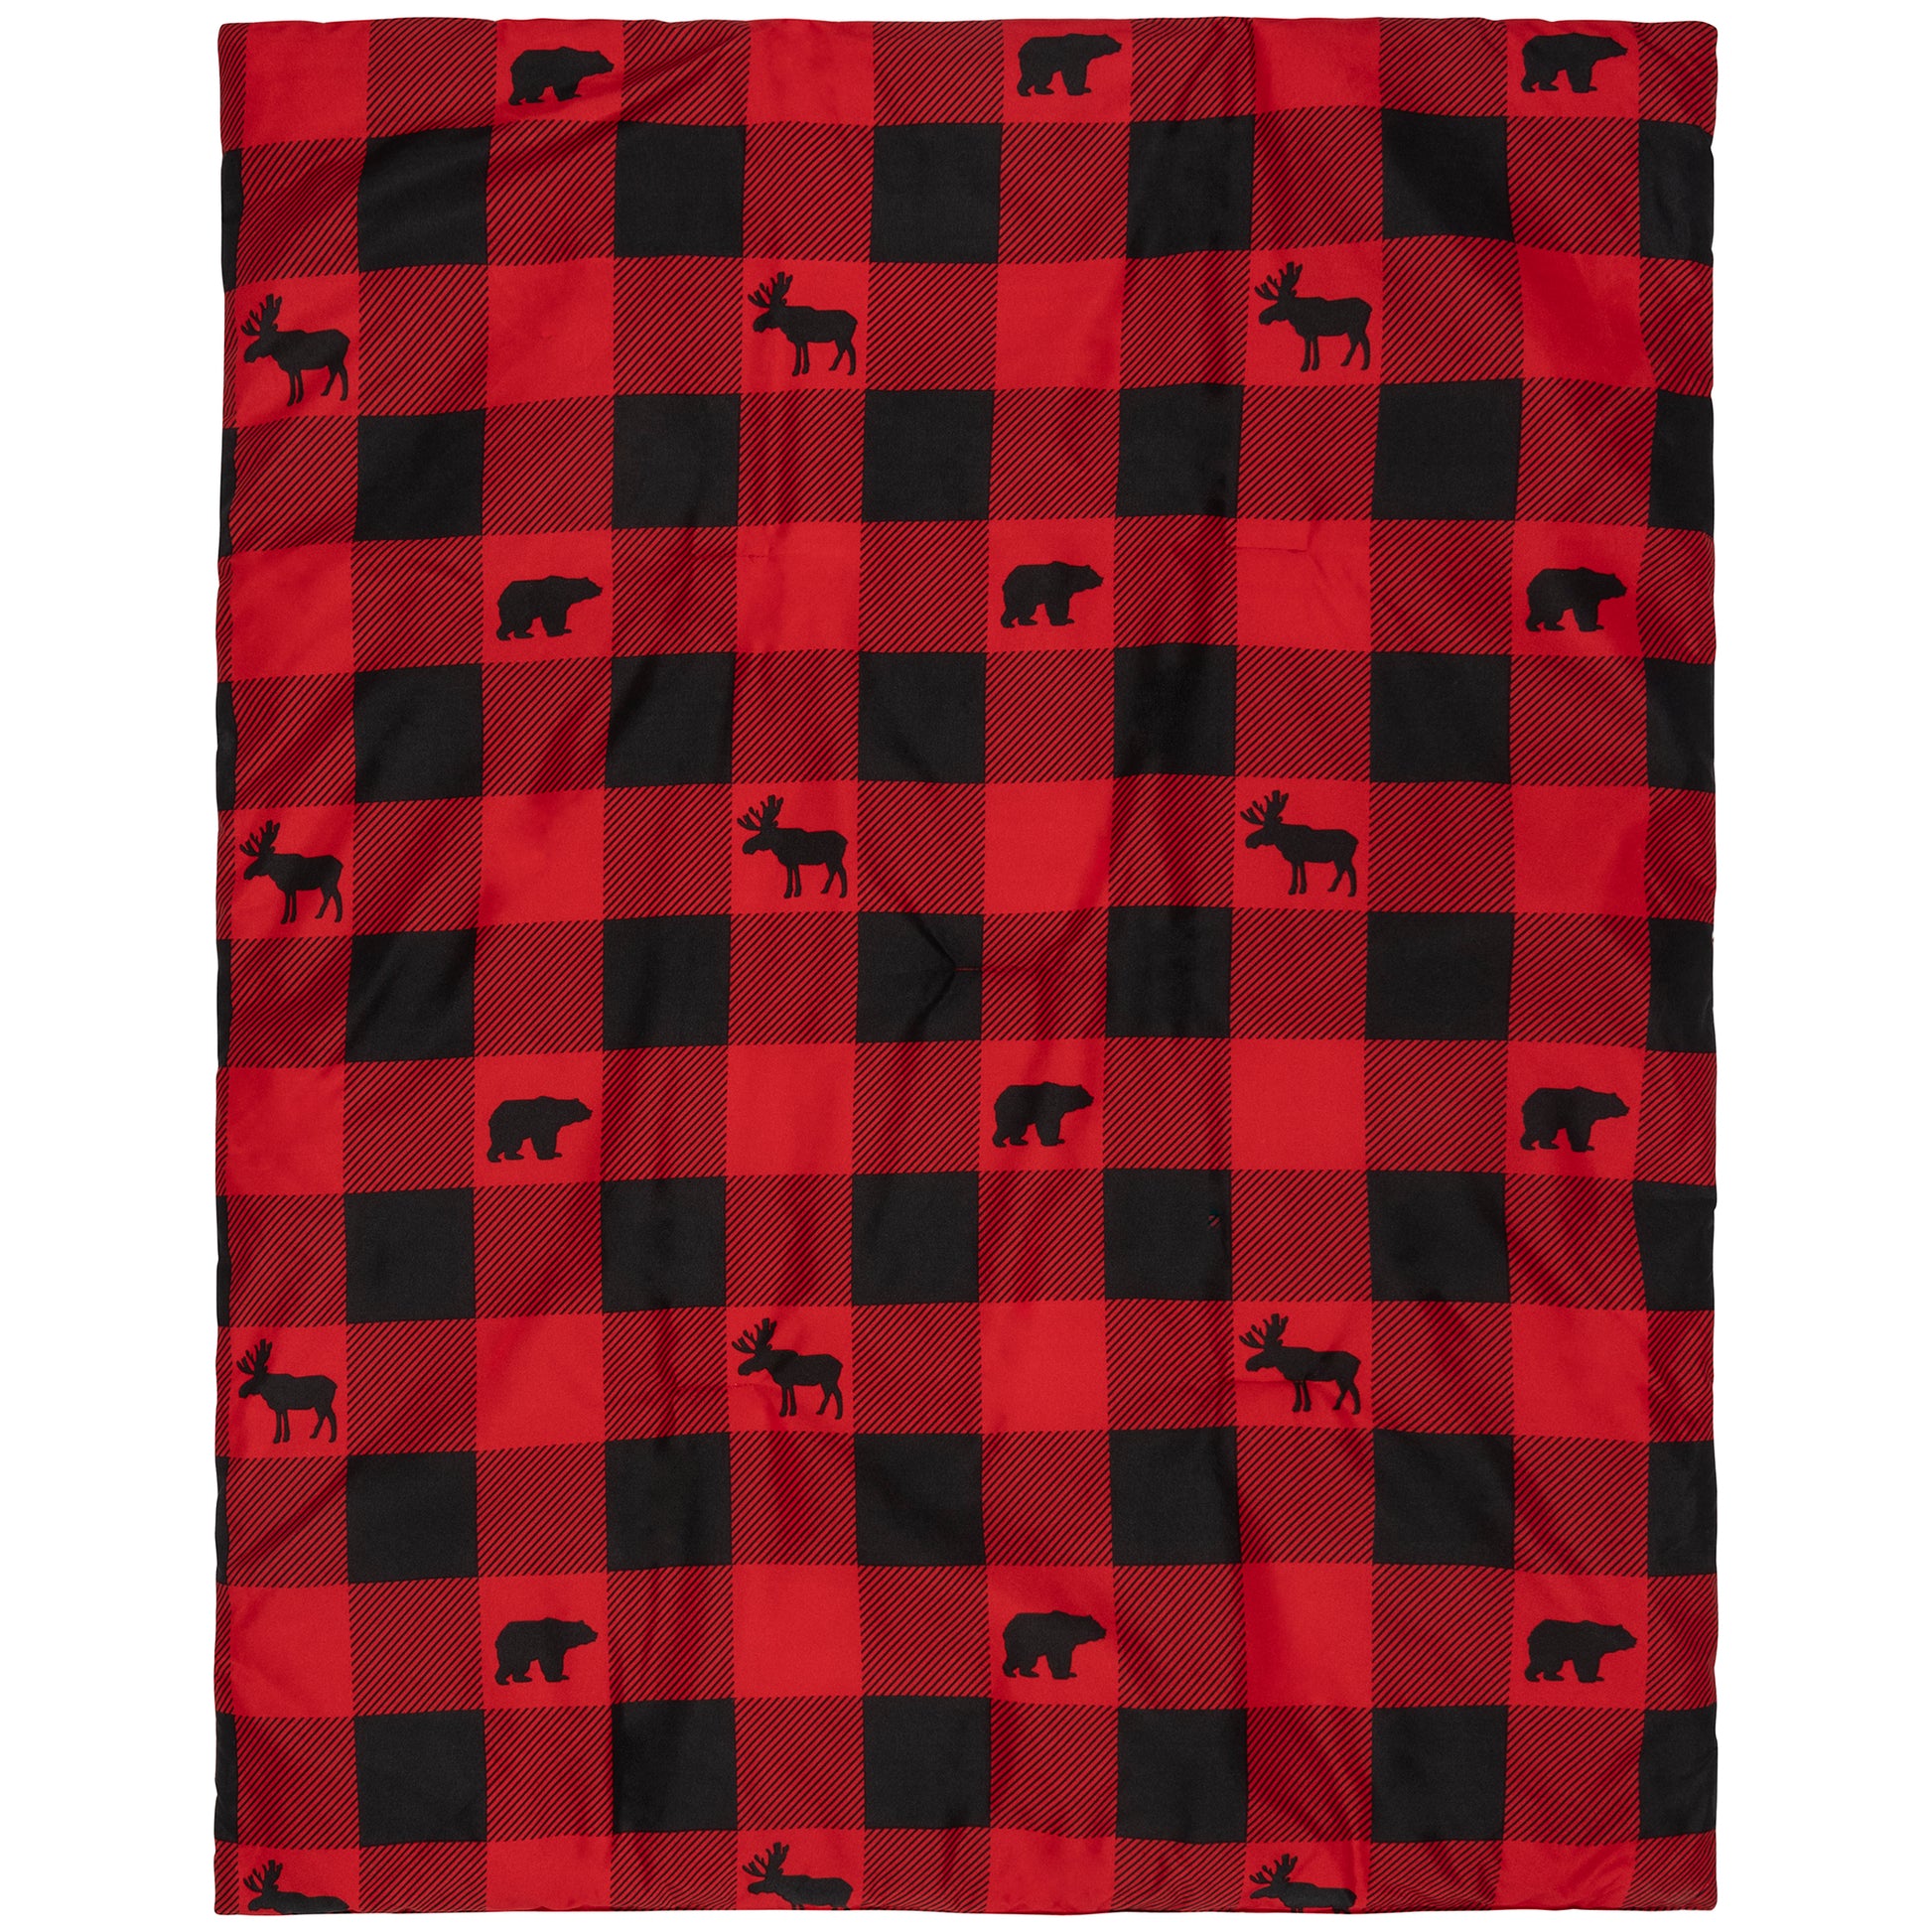  Buffalo Check 3 Piece Crib Bedding Set by Sammy & Lou®- crib quilt laid out front